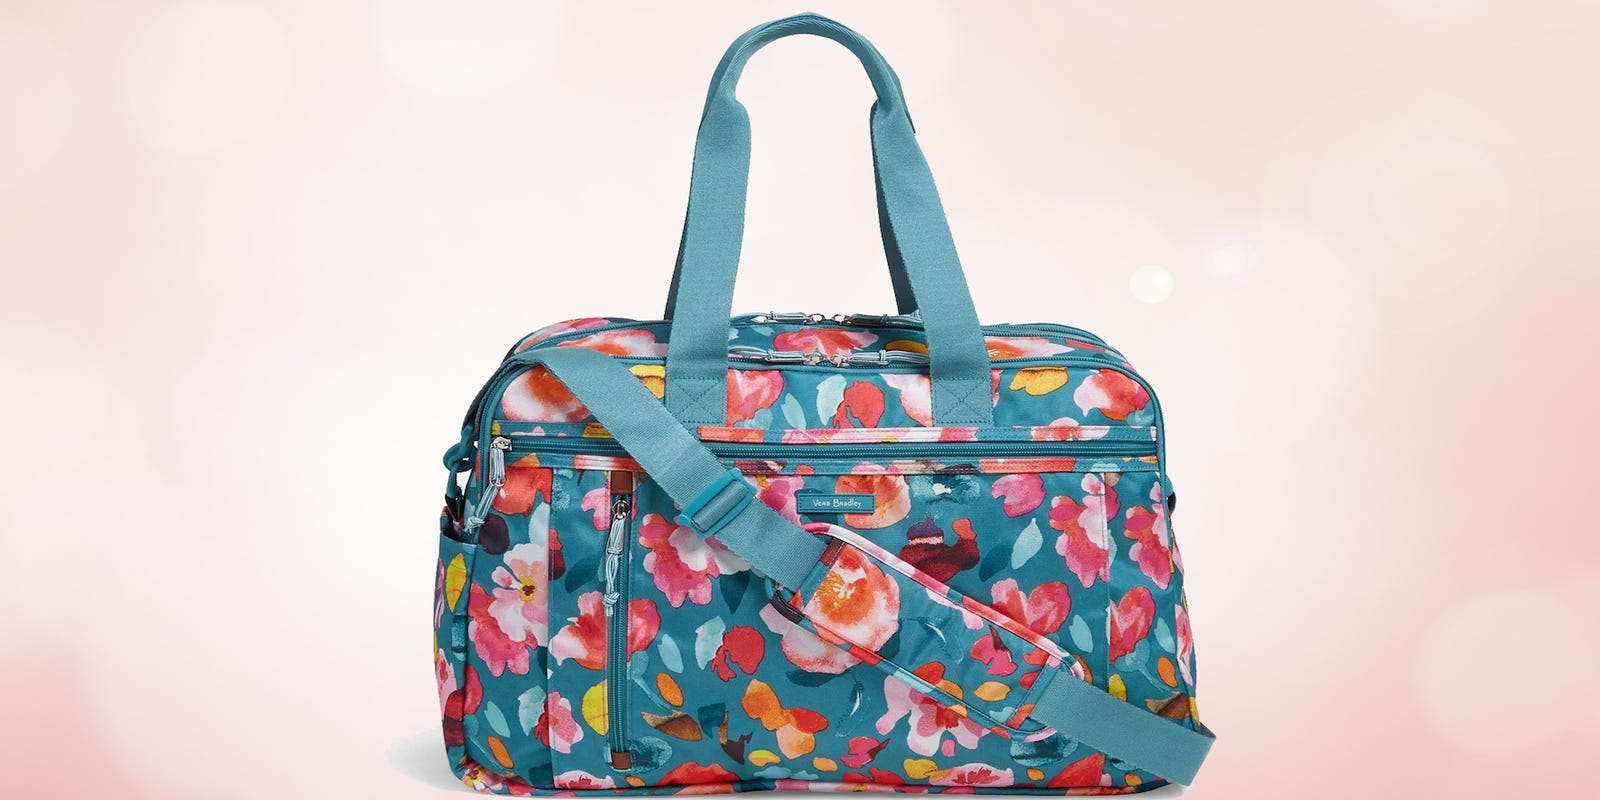 Vera Bradley Outlet sale Get an extra 30 off already discounted prices